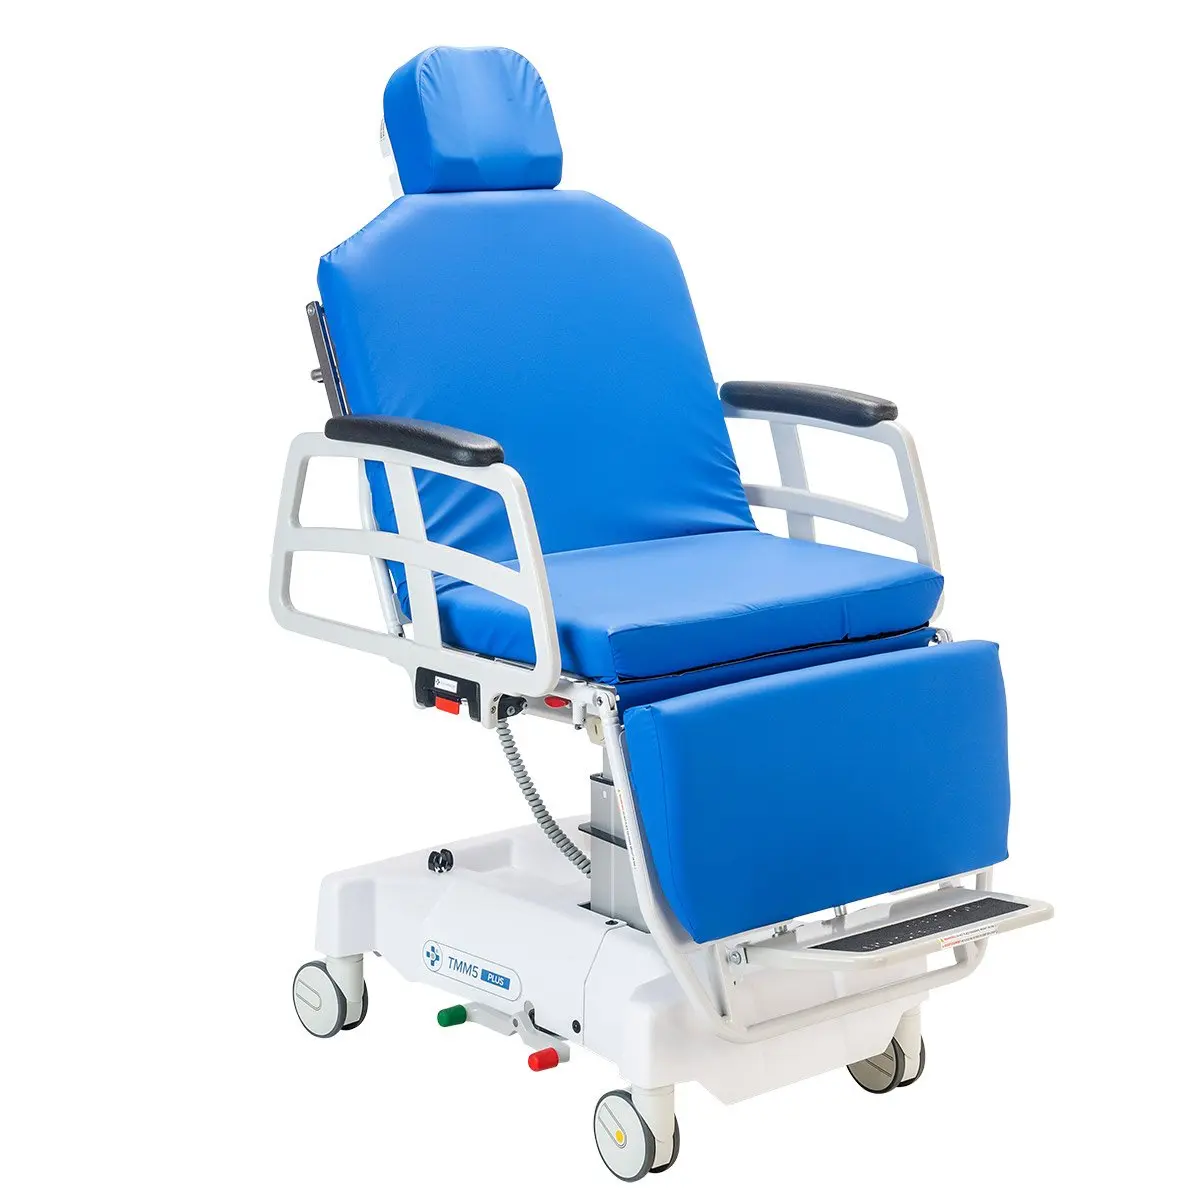 Transmotion TMM5 PLUS Surgical Stretcher-Chair